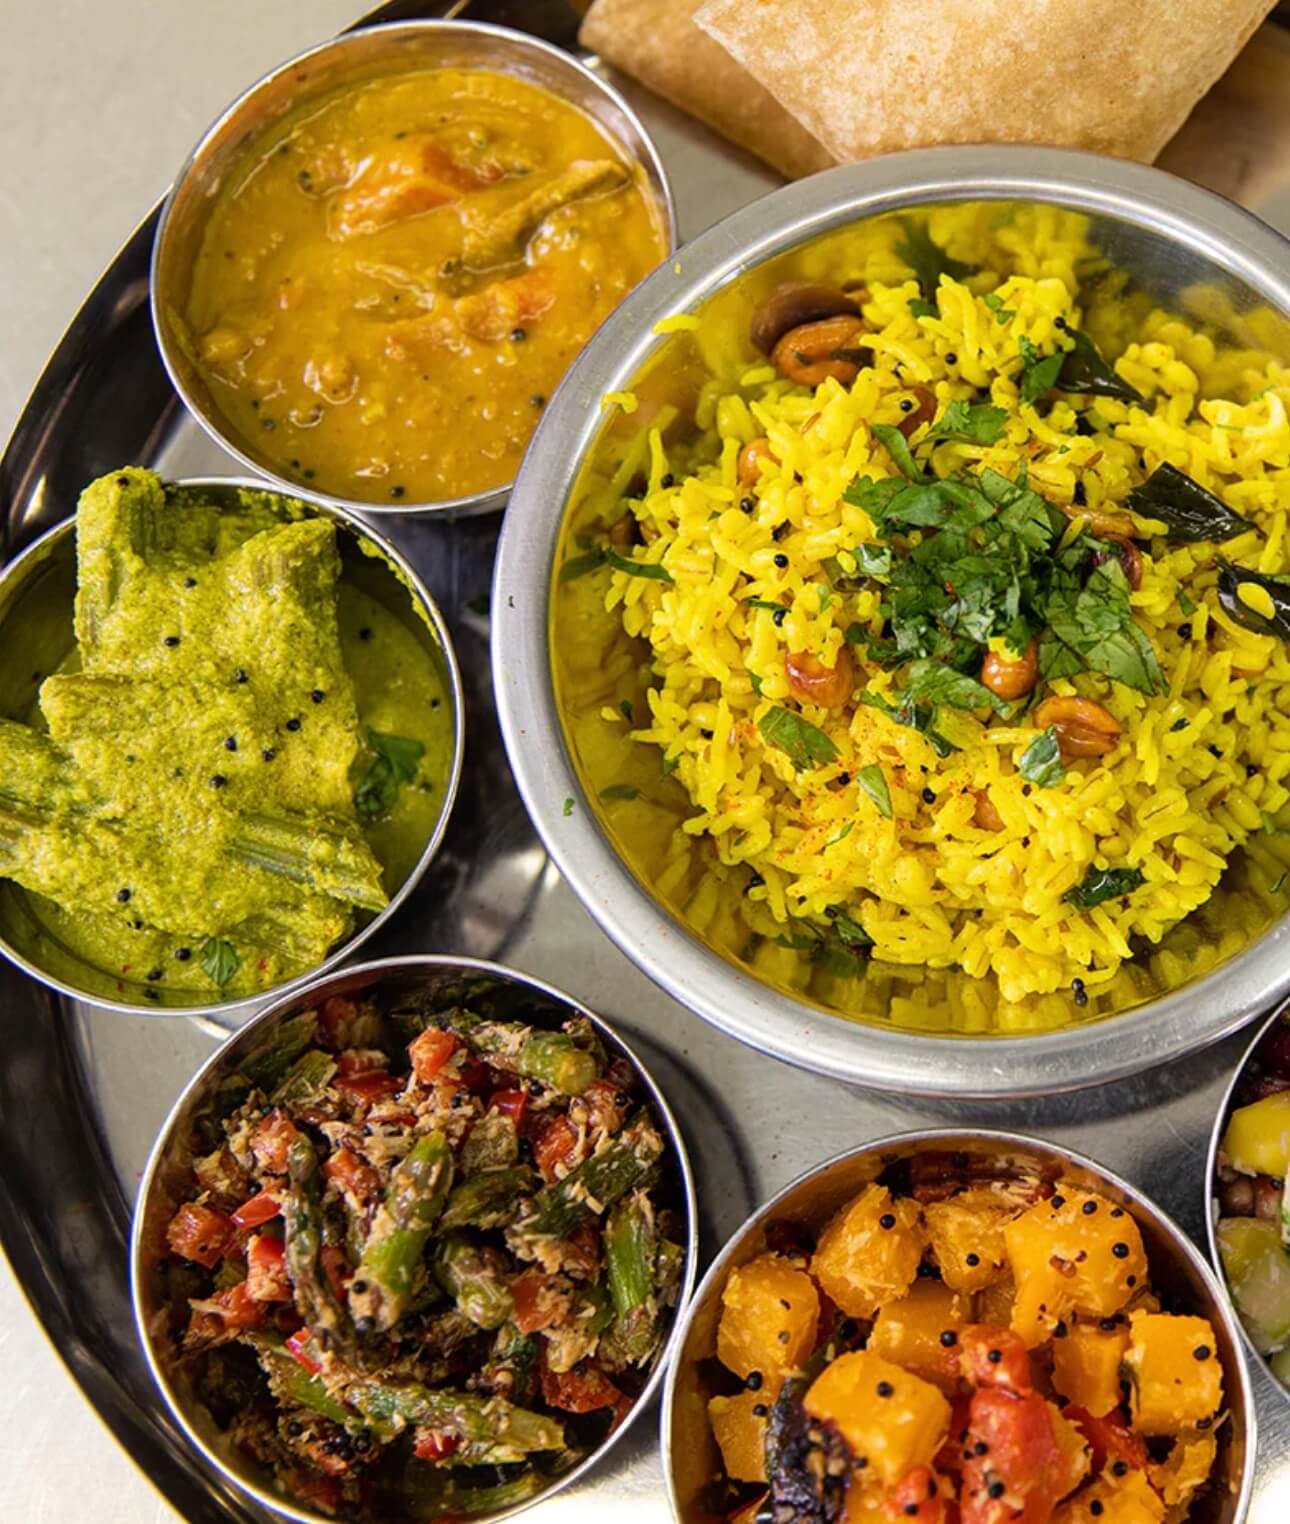 A South Indian-inspired meal from Tapovana Lunch Box 